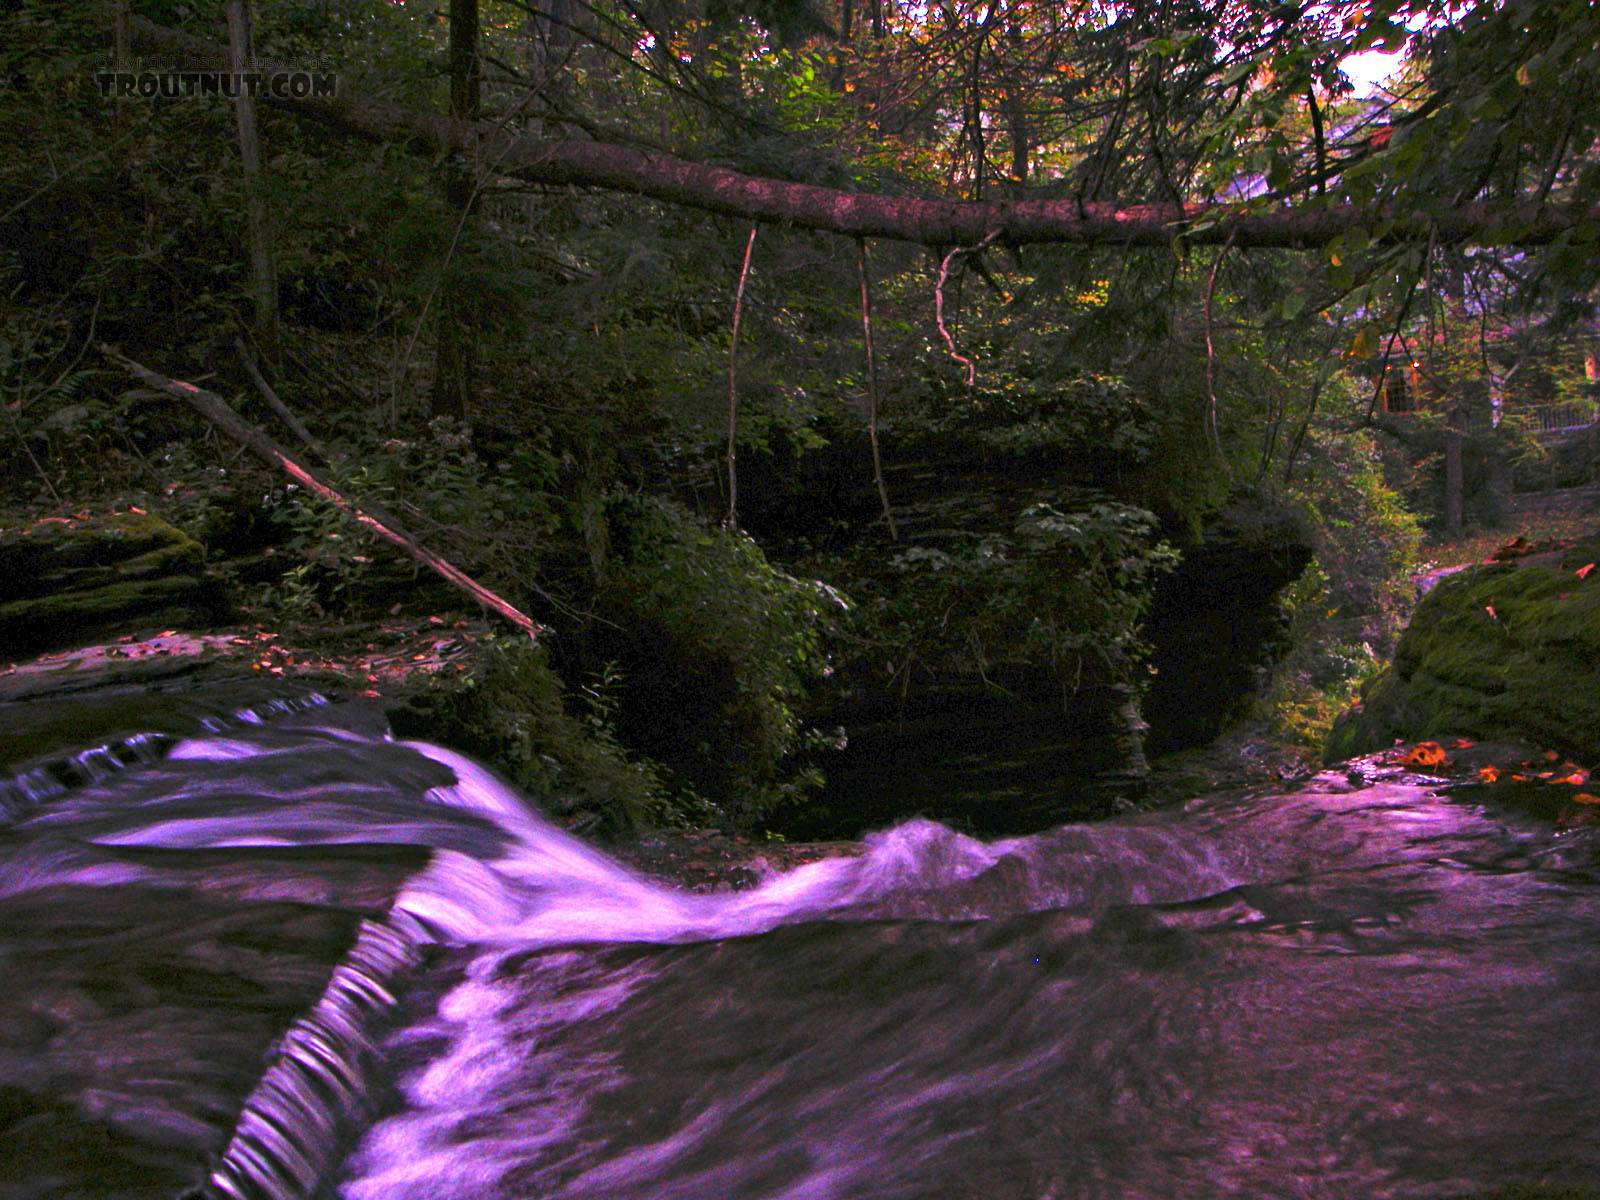 I took this picture in very low light and enhanced it.  This waterfall is kind of a strange meeting of two worlds: below the falls, there is a parking lot and an old millhouse at a very popular state park.  Above the little falls the park is wild and there's little trace of people. From Mystery Creek # 62 in New York.